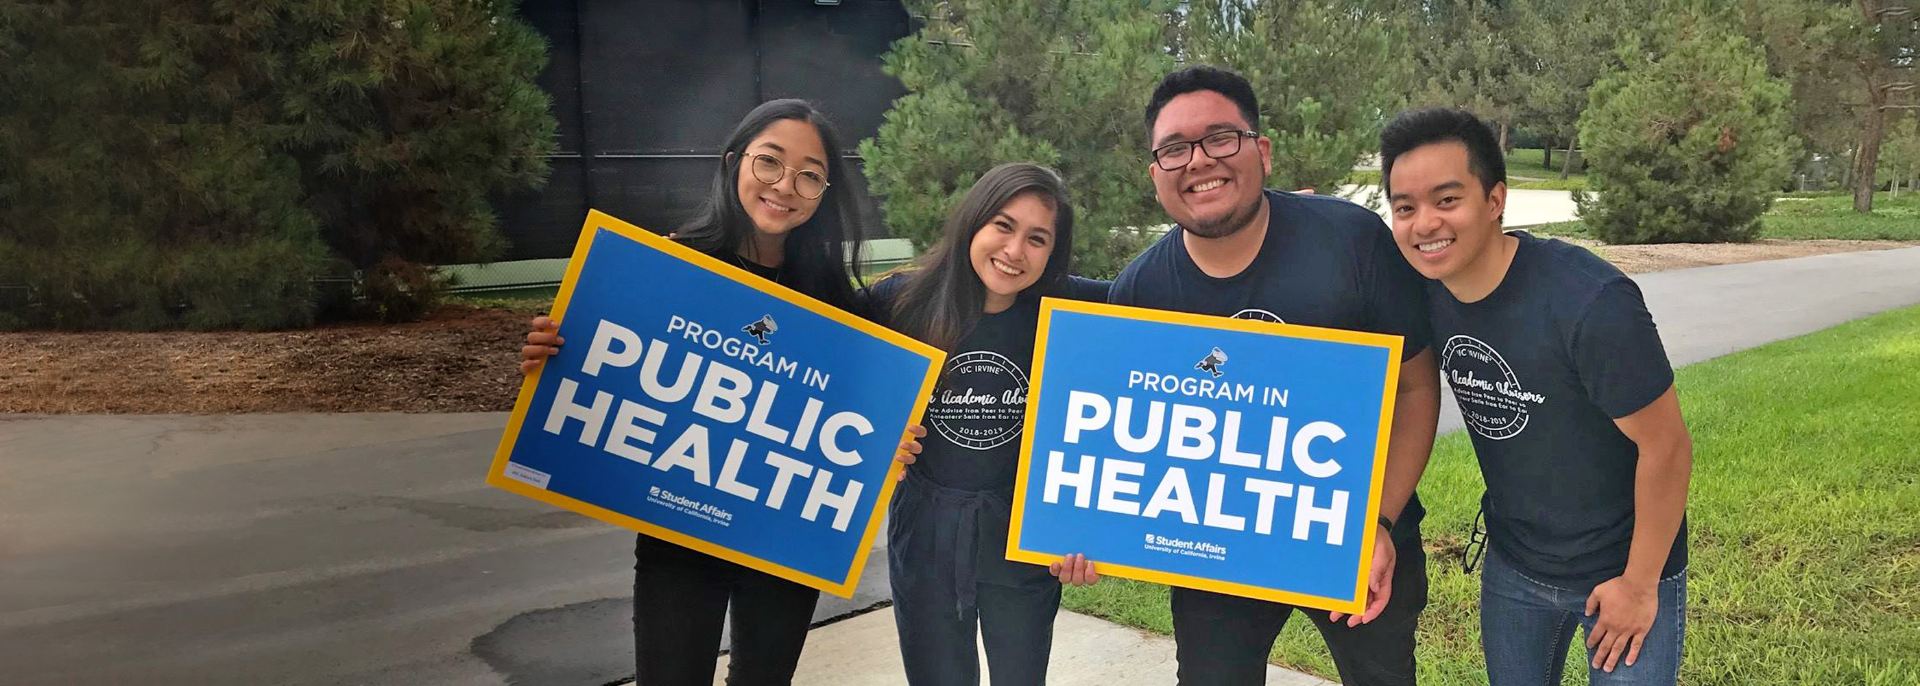 About UCI Program in Public Health